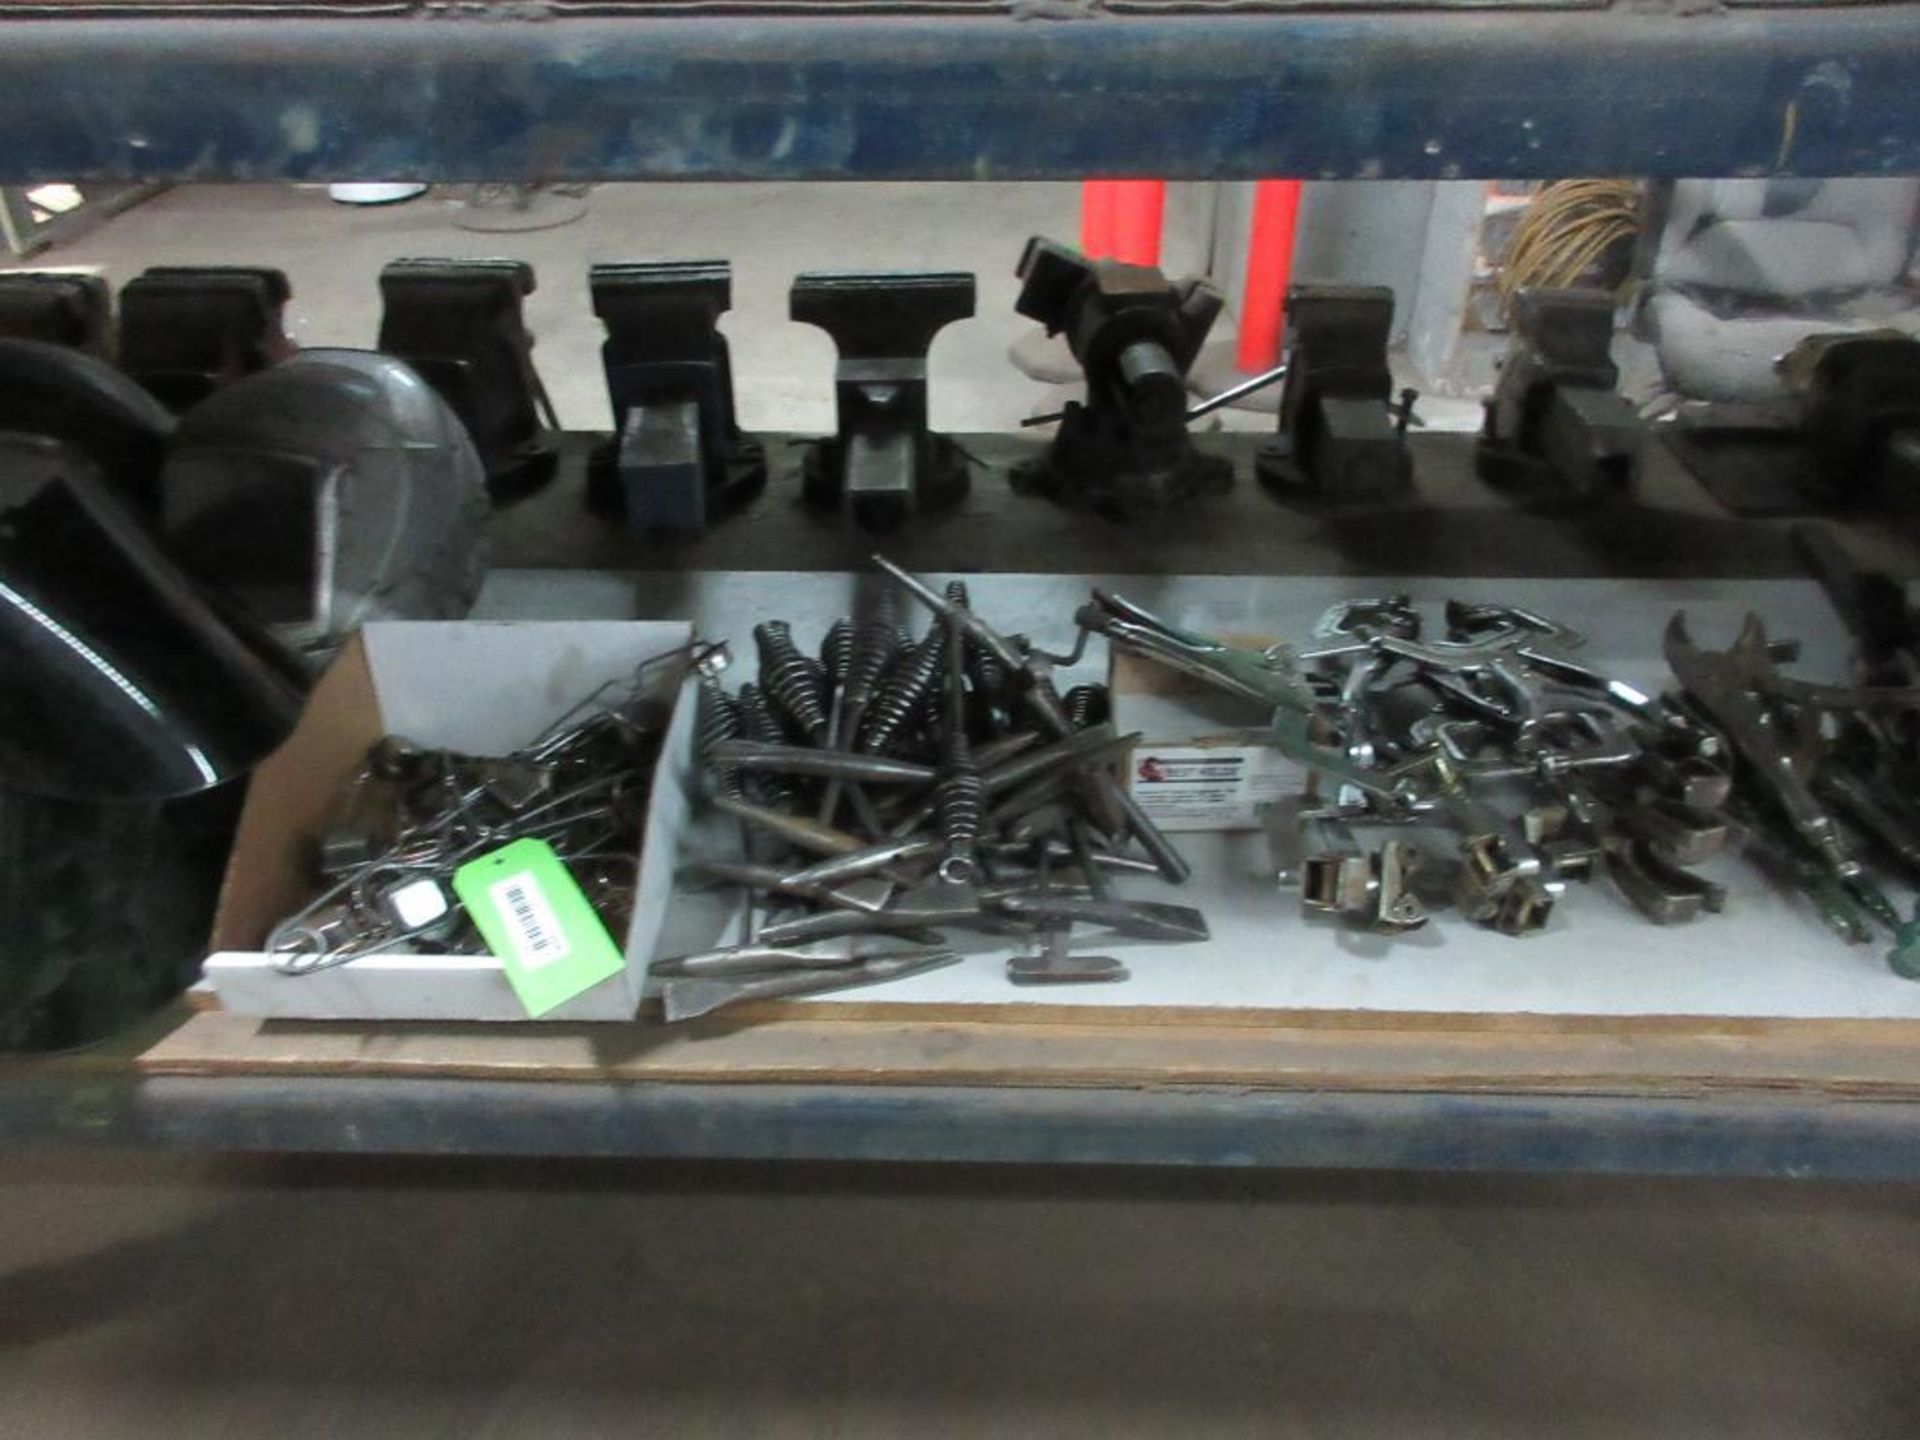 LOT OF WELDING MASKS, GOGGLES, CLAMPS, BRUSHES, IGNITORS, PICKS (CENTRAL TOOL CRIB) - Image 3 of 5